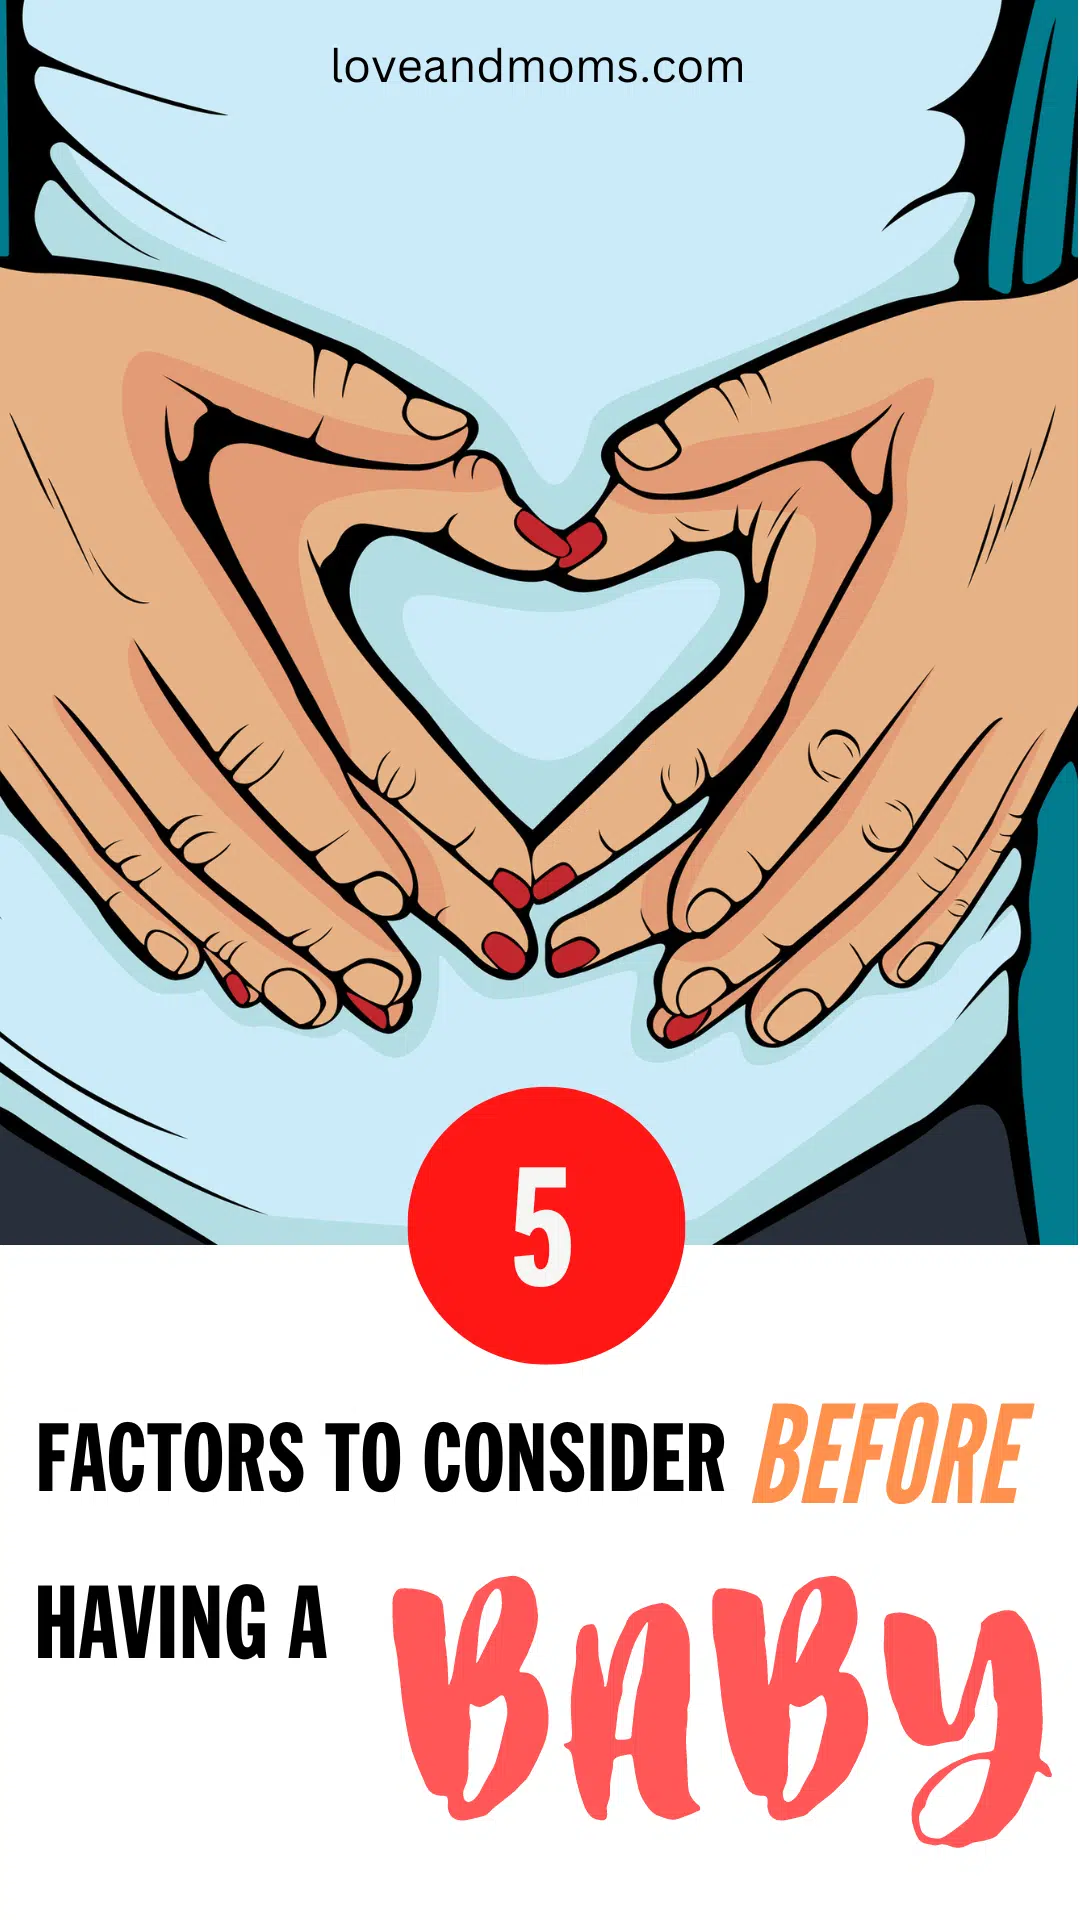 5 Factors to consider before having a baby 